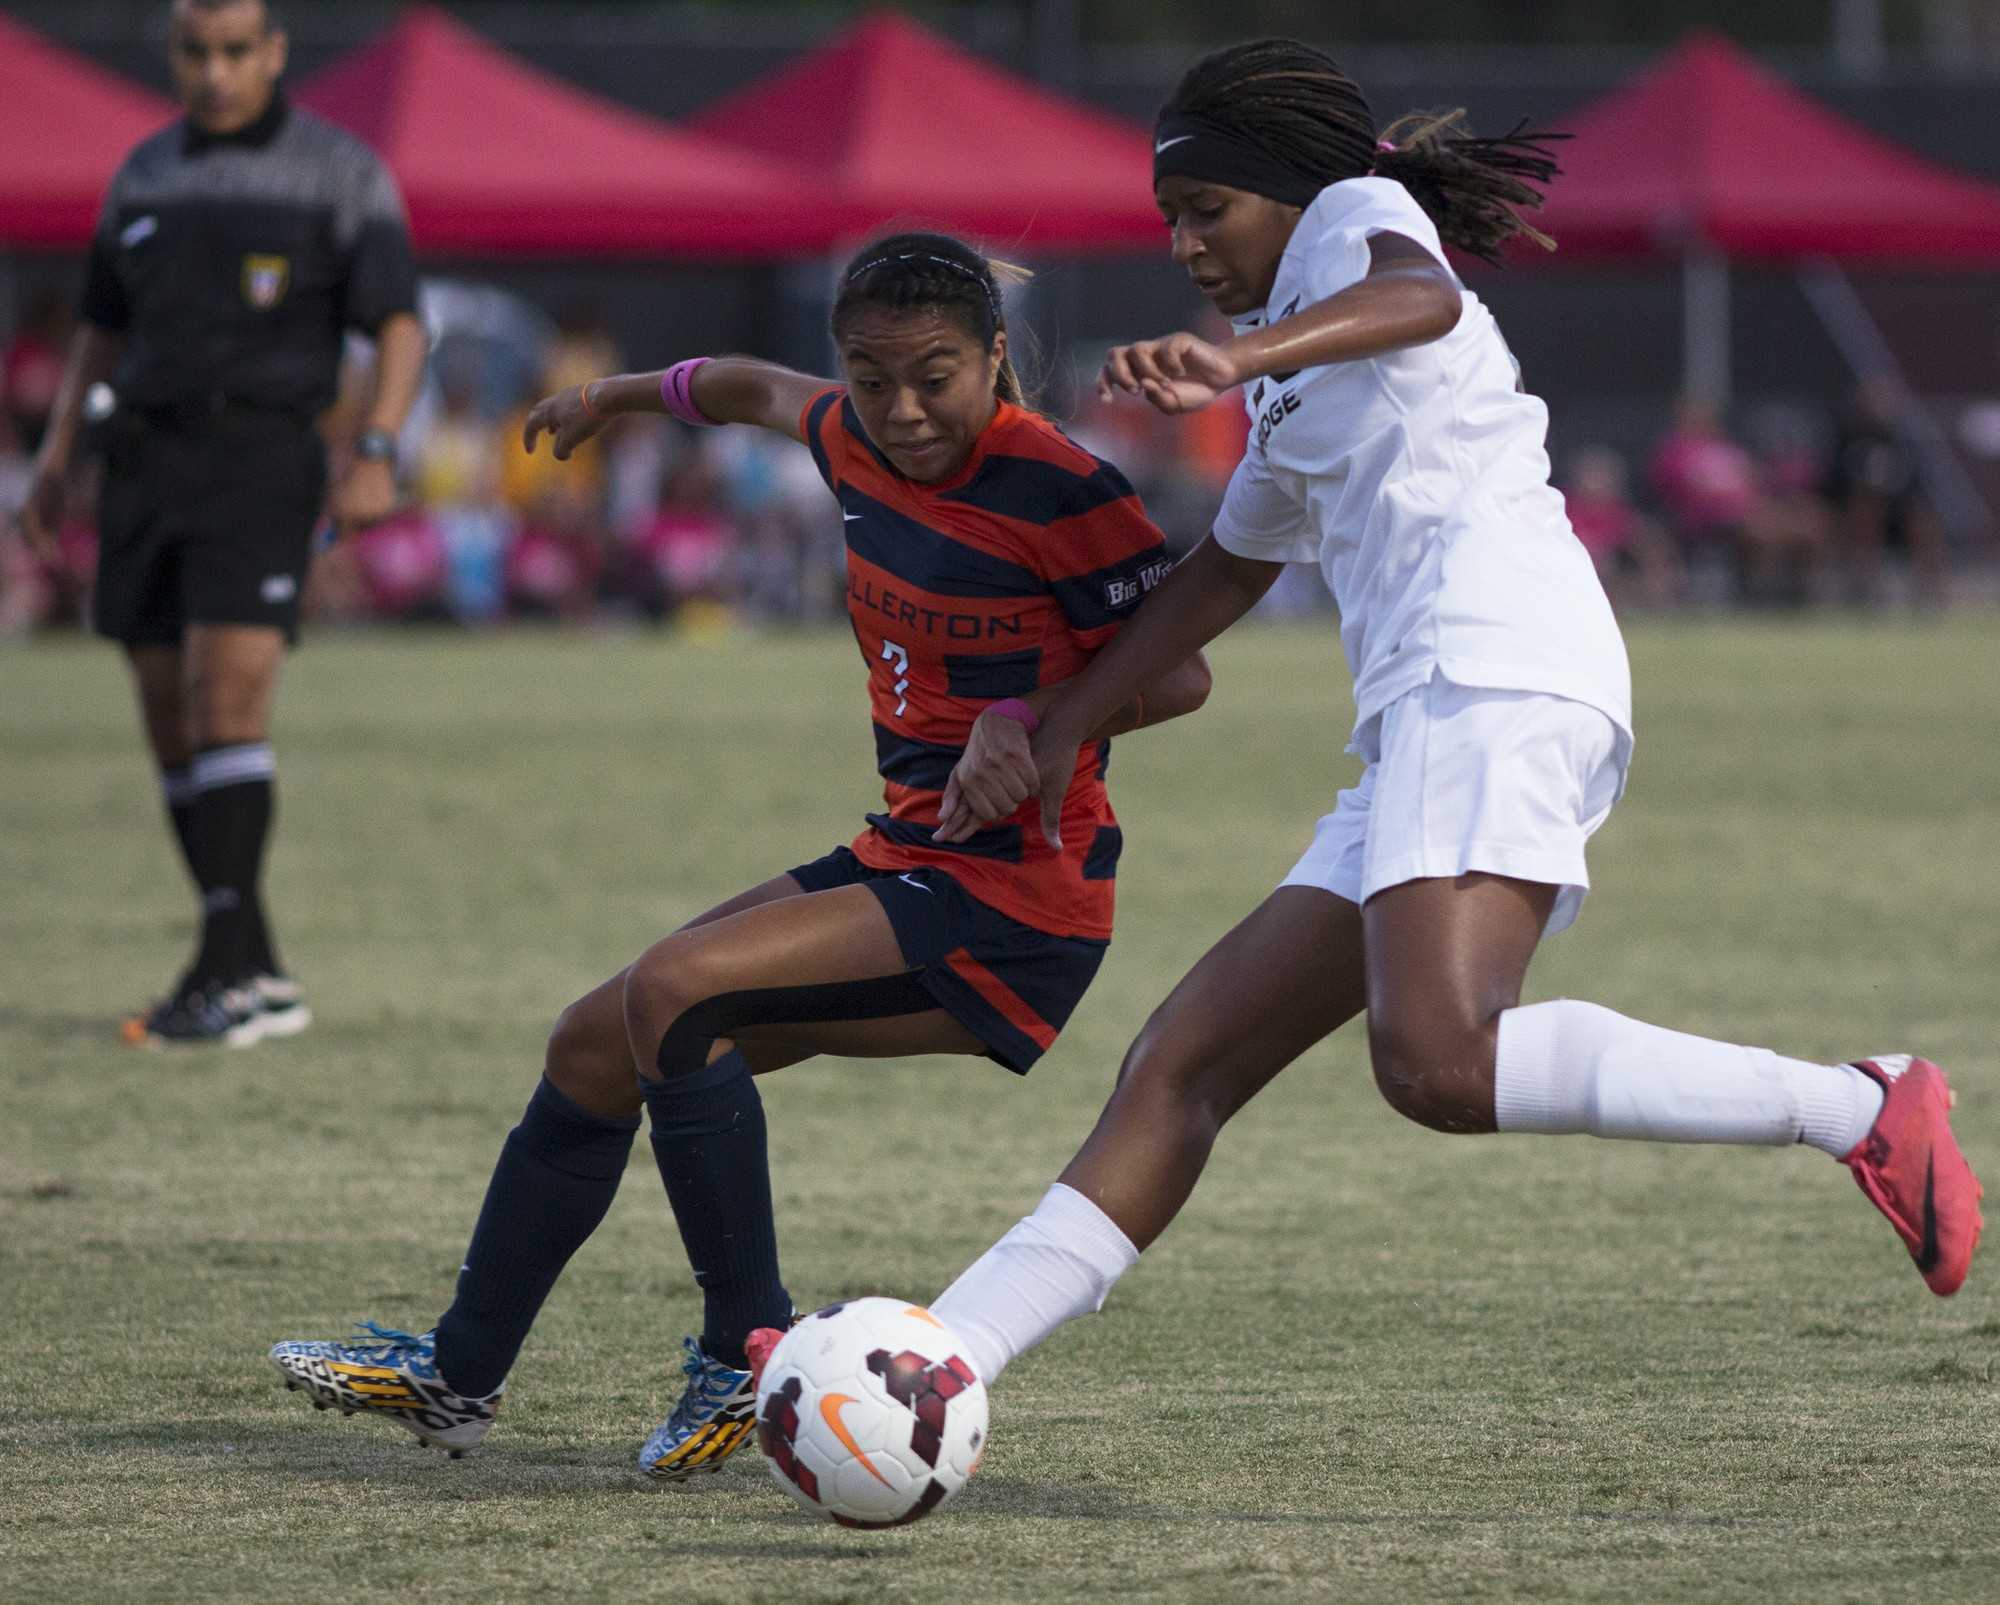 Womens soccer spearheads a light sports schedule this week. Photo credit: File Photo/The Sundial